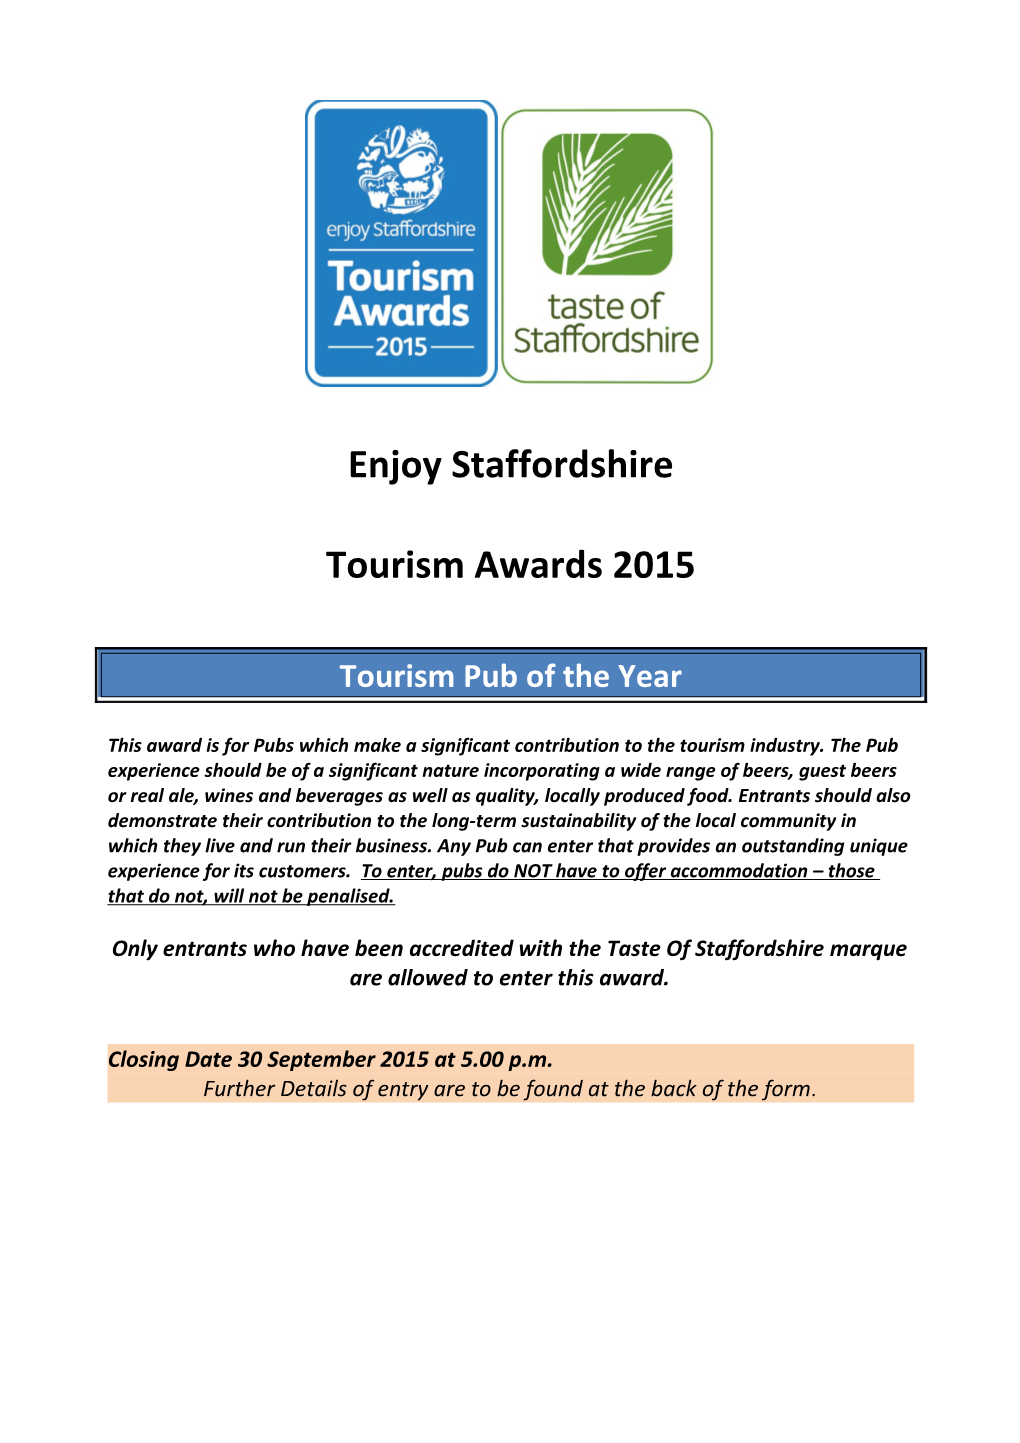 Tourism Pub of the Year